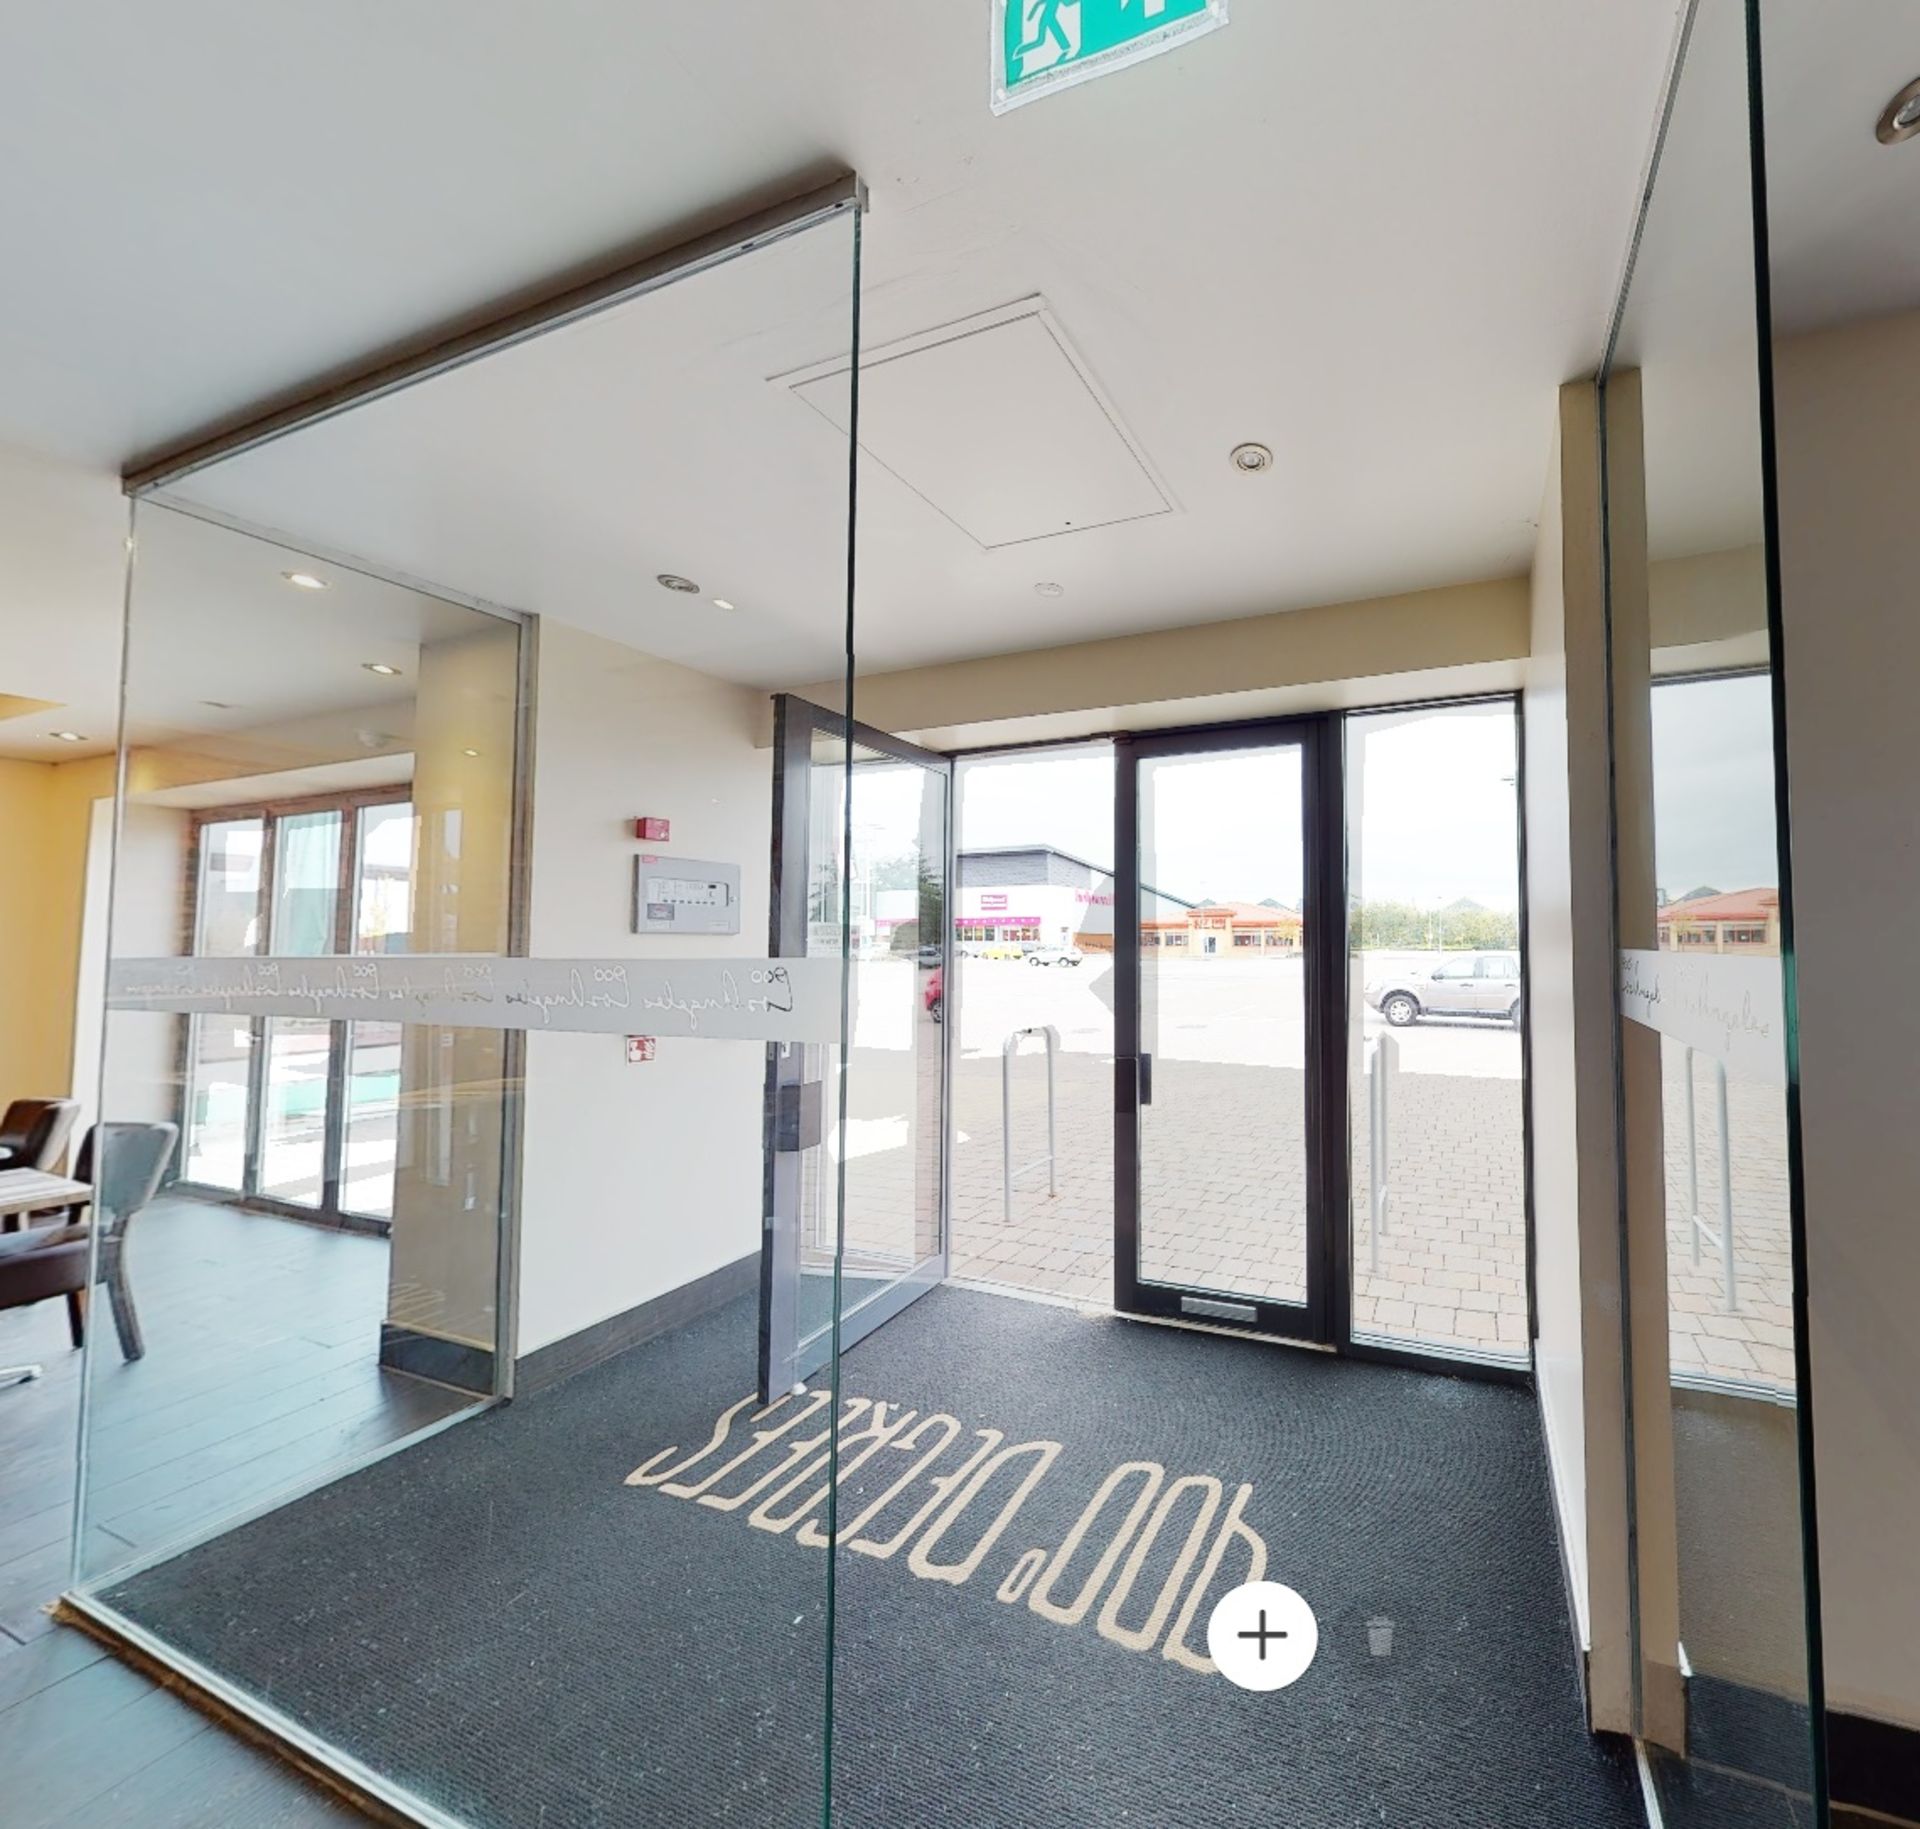 1 x Glass Entrance Foyer - Three Sections of Glass - Please See Details - CL701 - Location: Ashton - Image 7 of 7